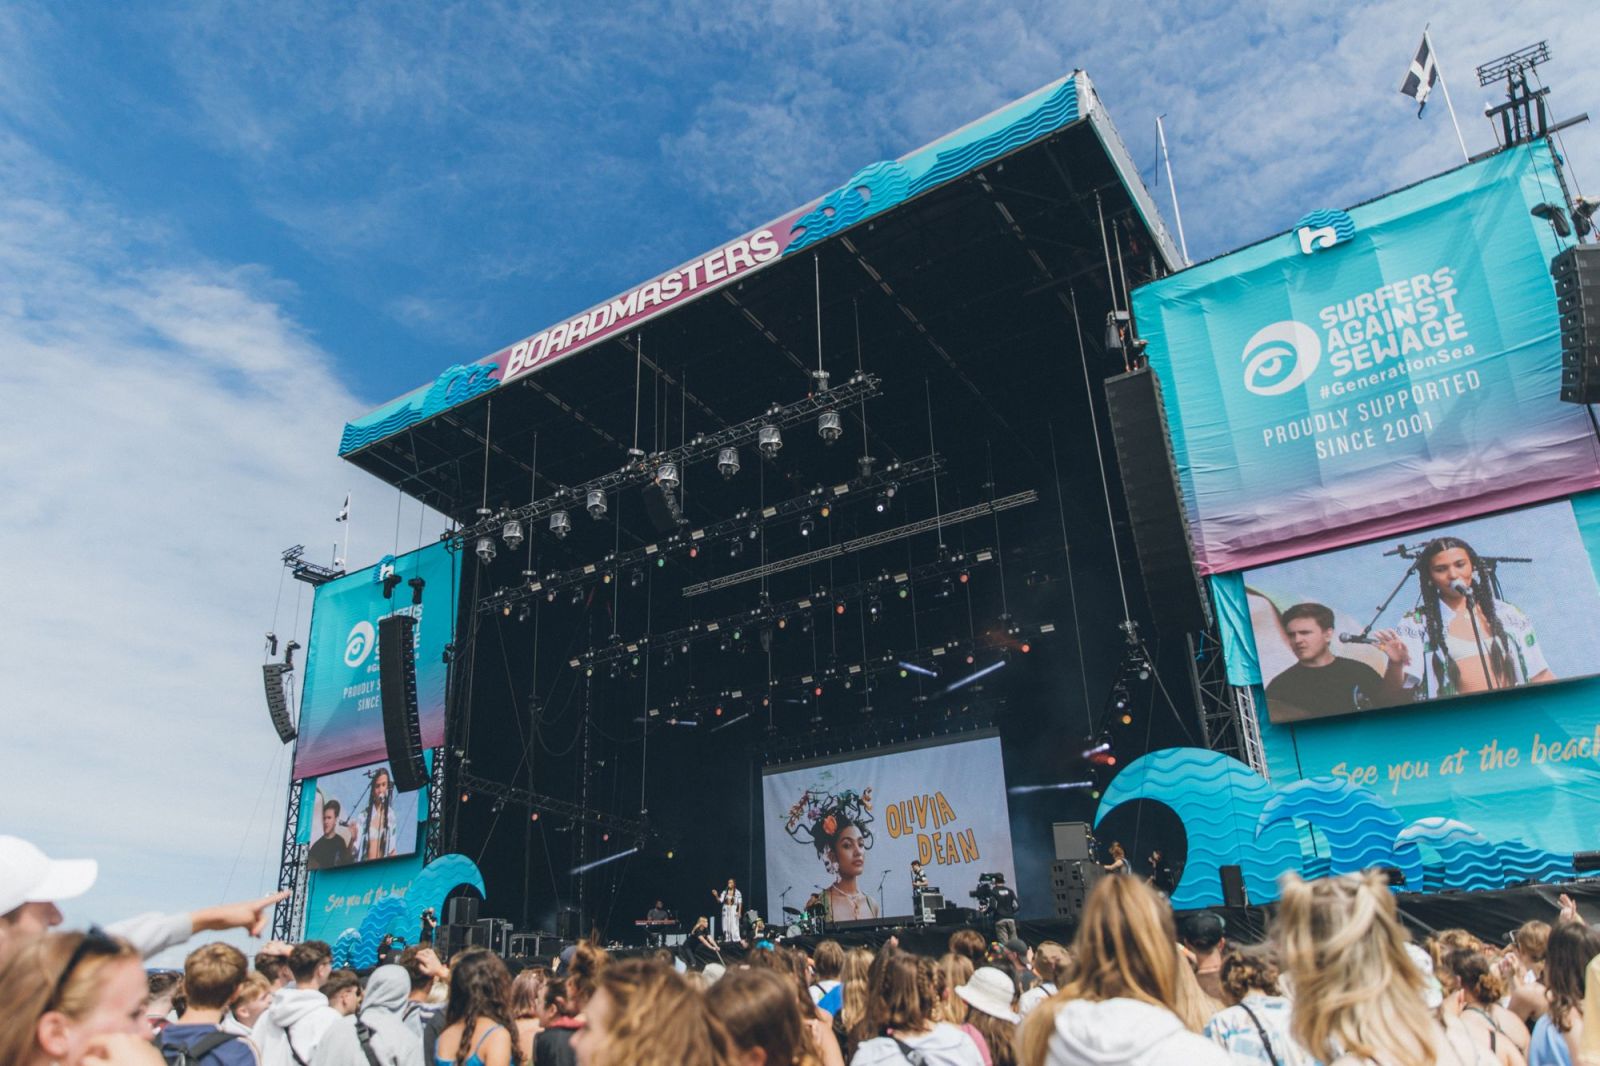 Olivia Dean during her Main Stage performance at Boardmasters 2021. Photo: Darina Stoda